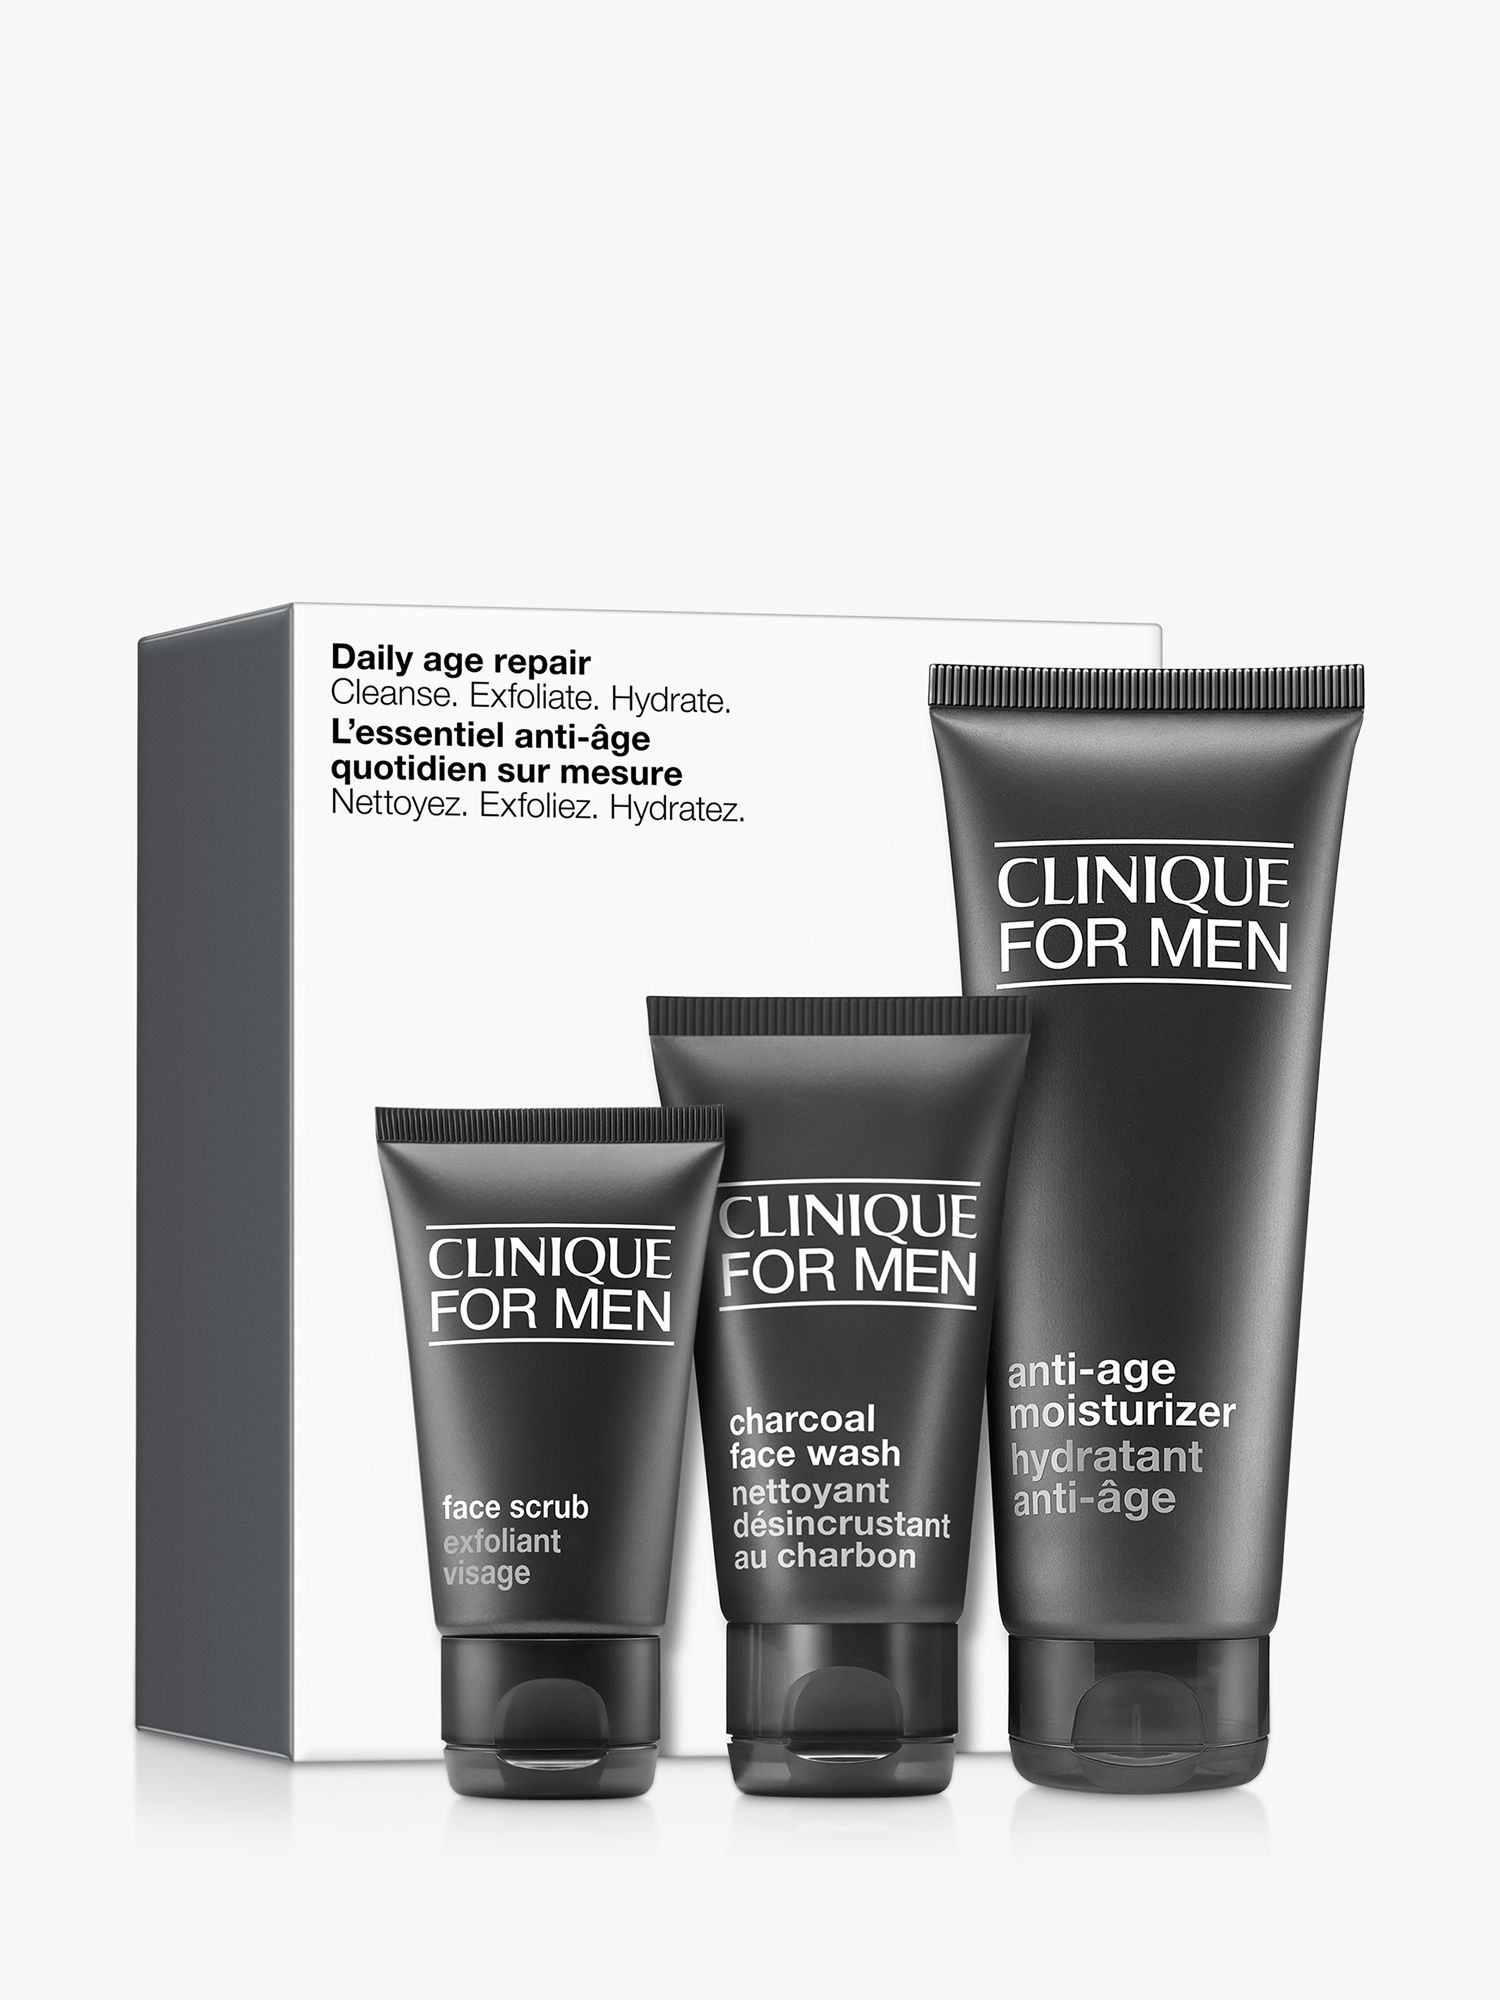 Clinique Daily Age Repair Skincare Gift Set for Men 1